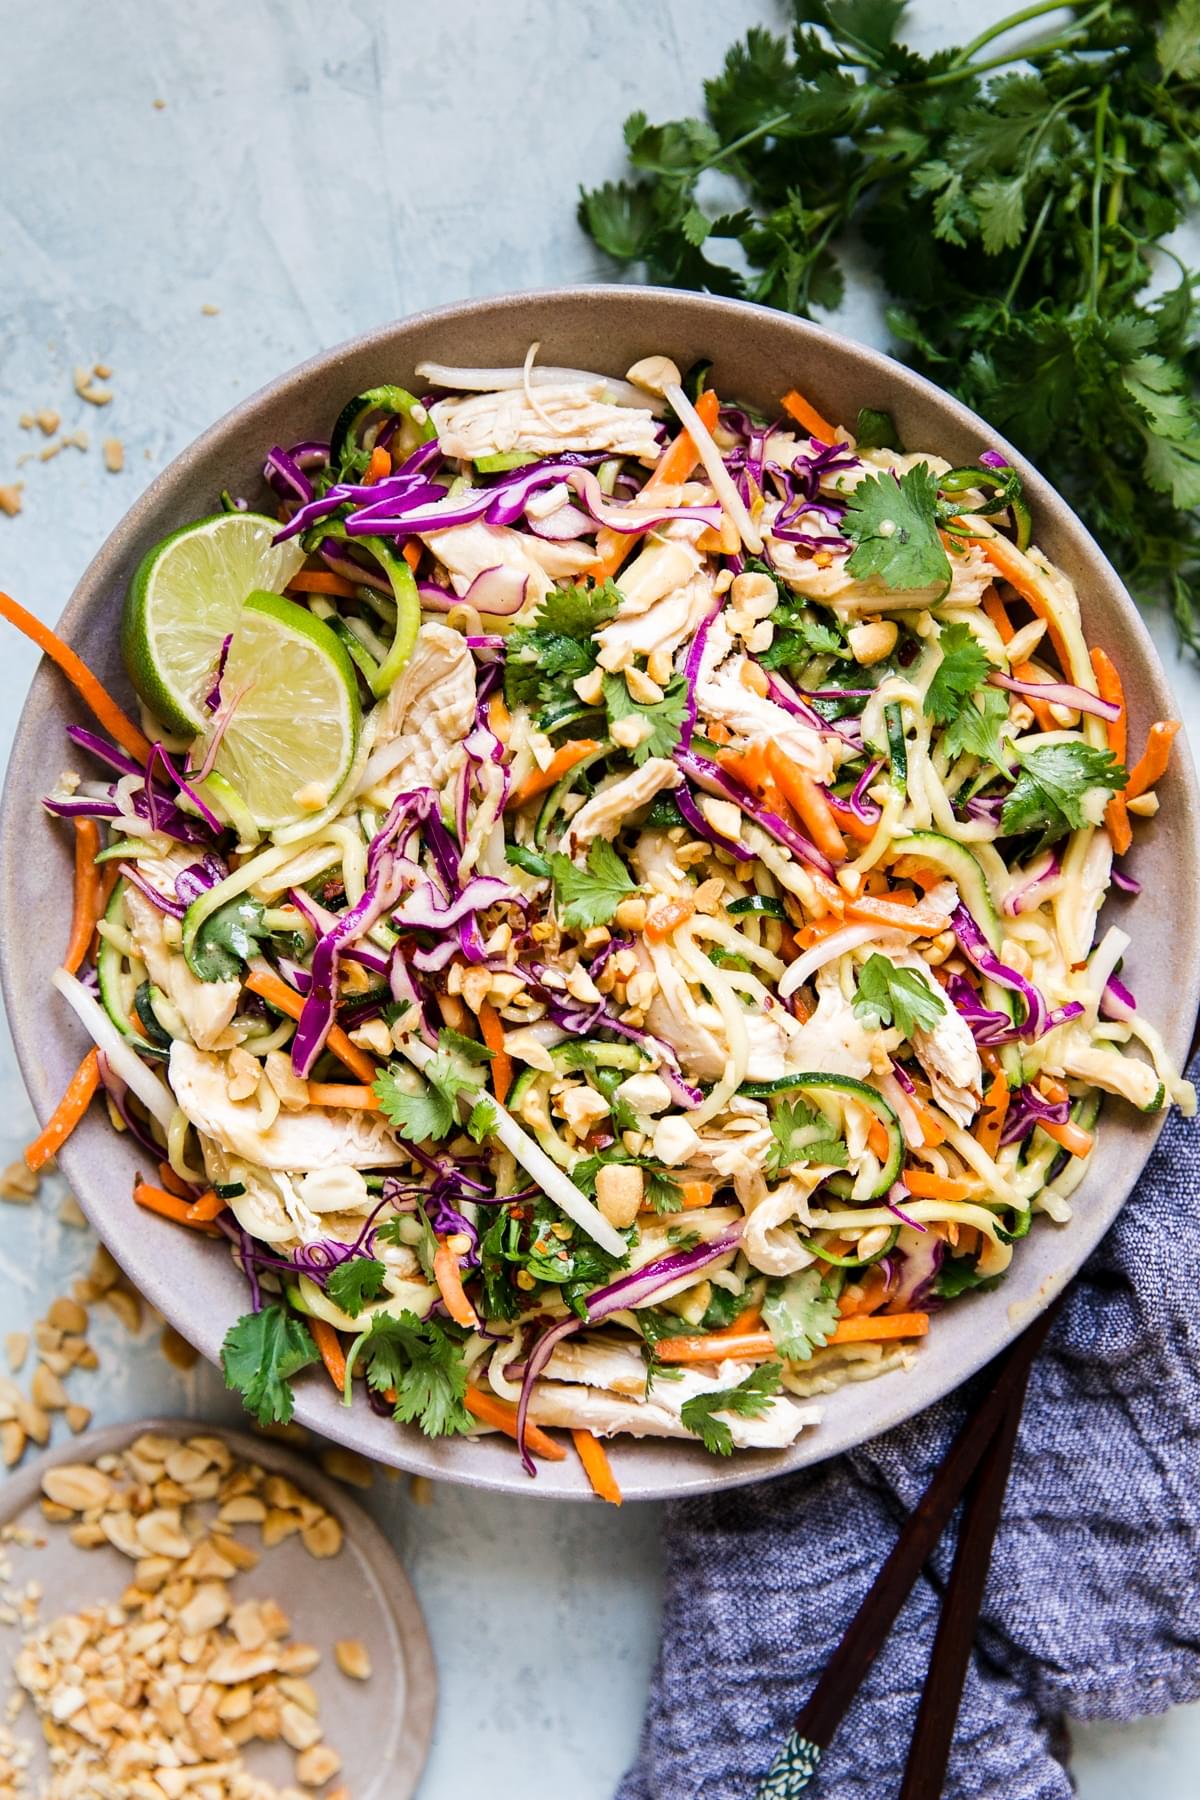 Thai Zoodle salad with chicken, peanuts, and fresh limes in a grey ceramic bowl